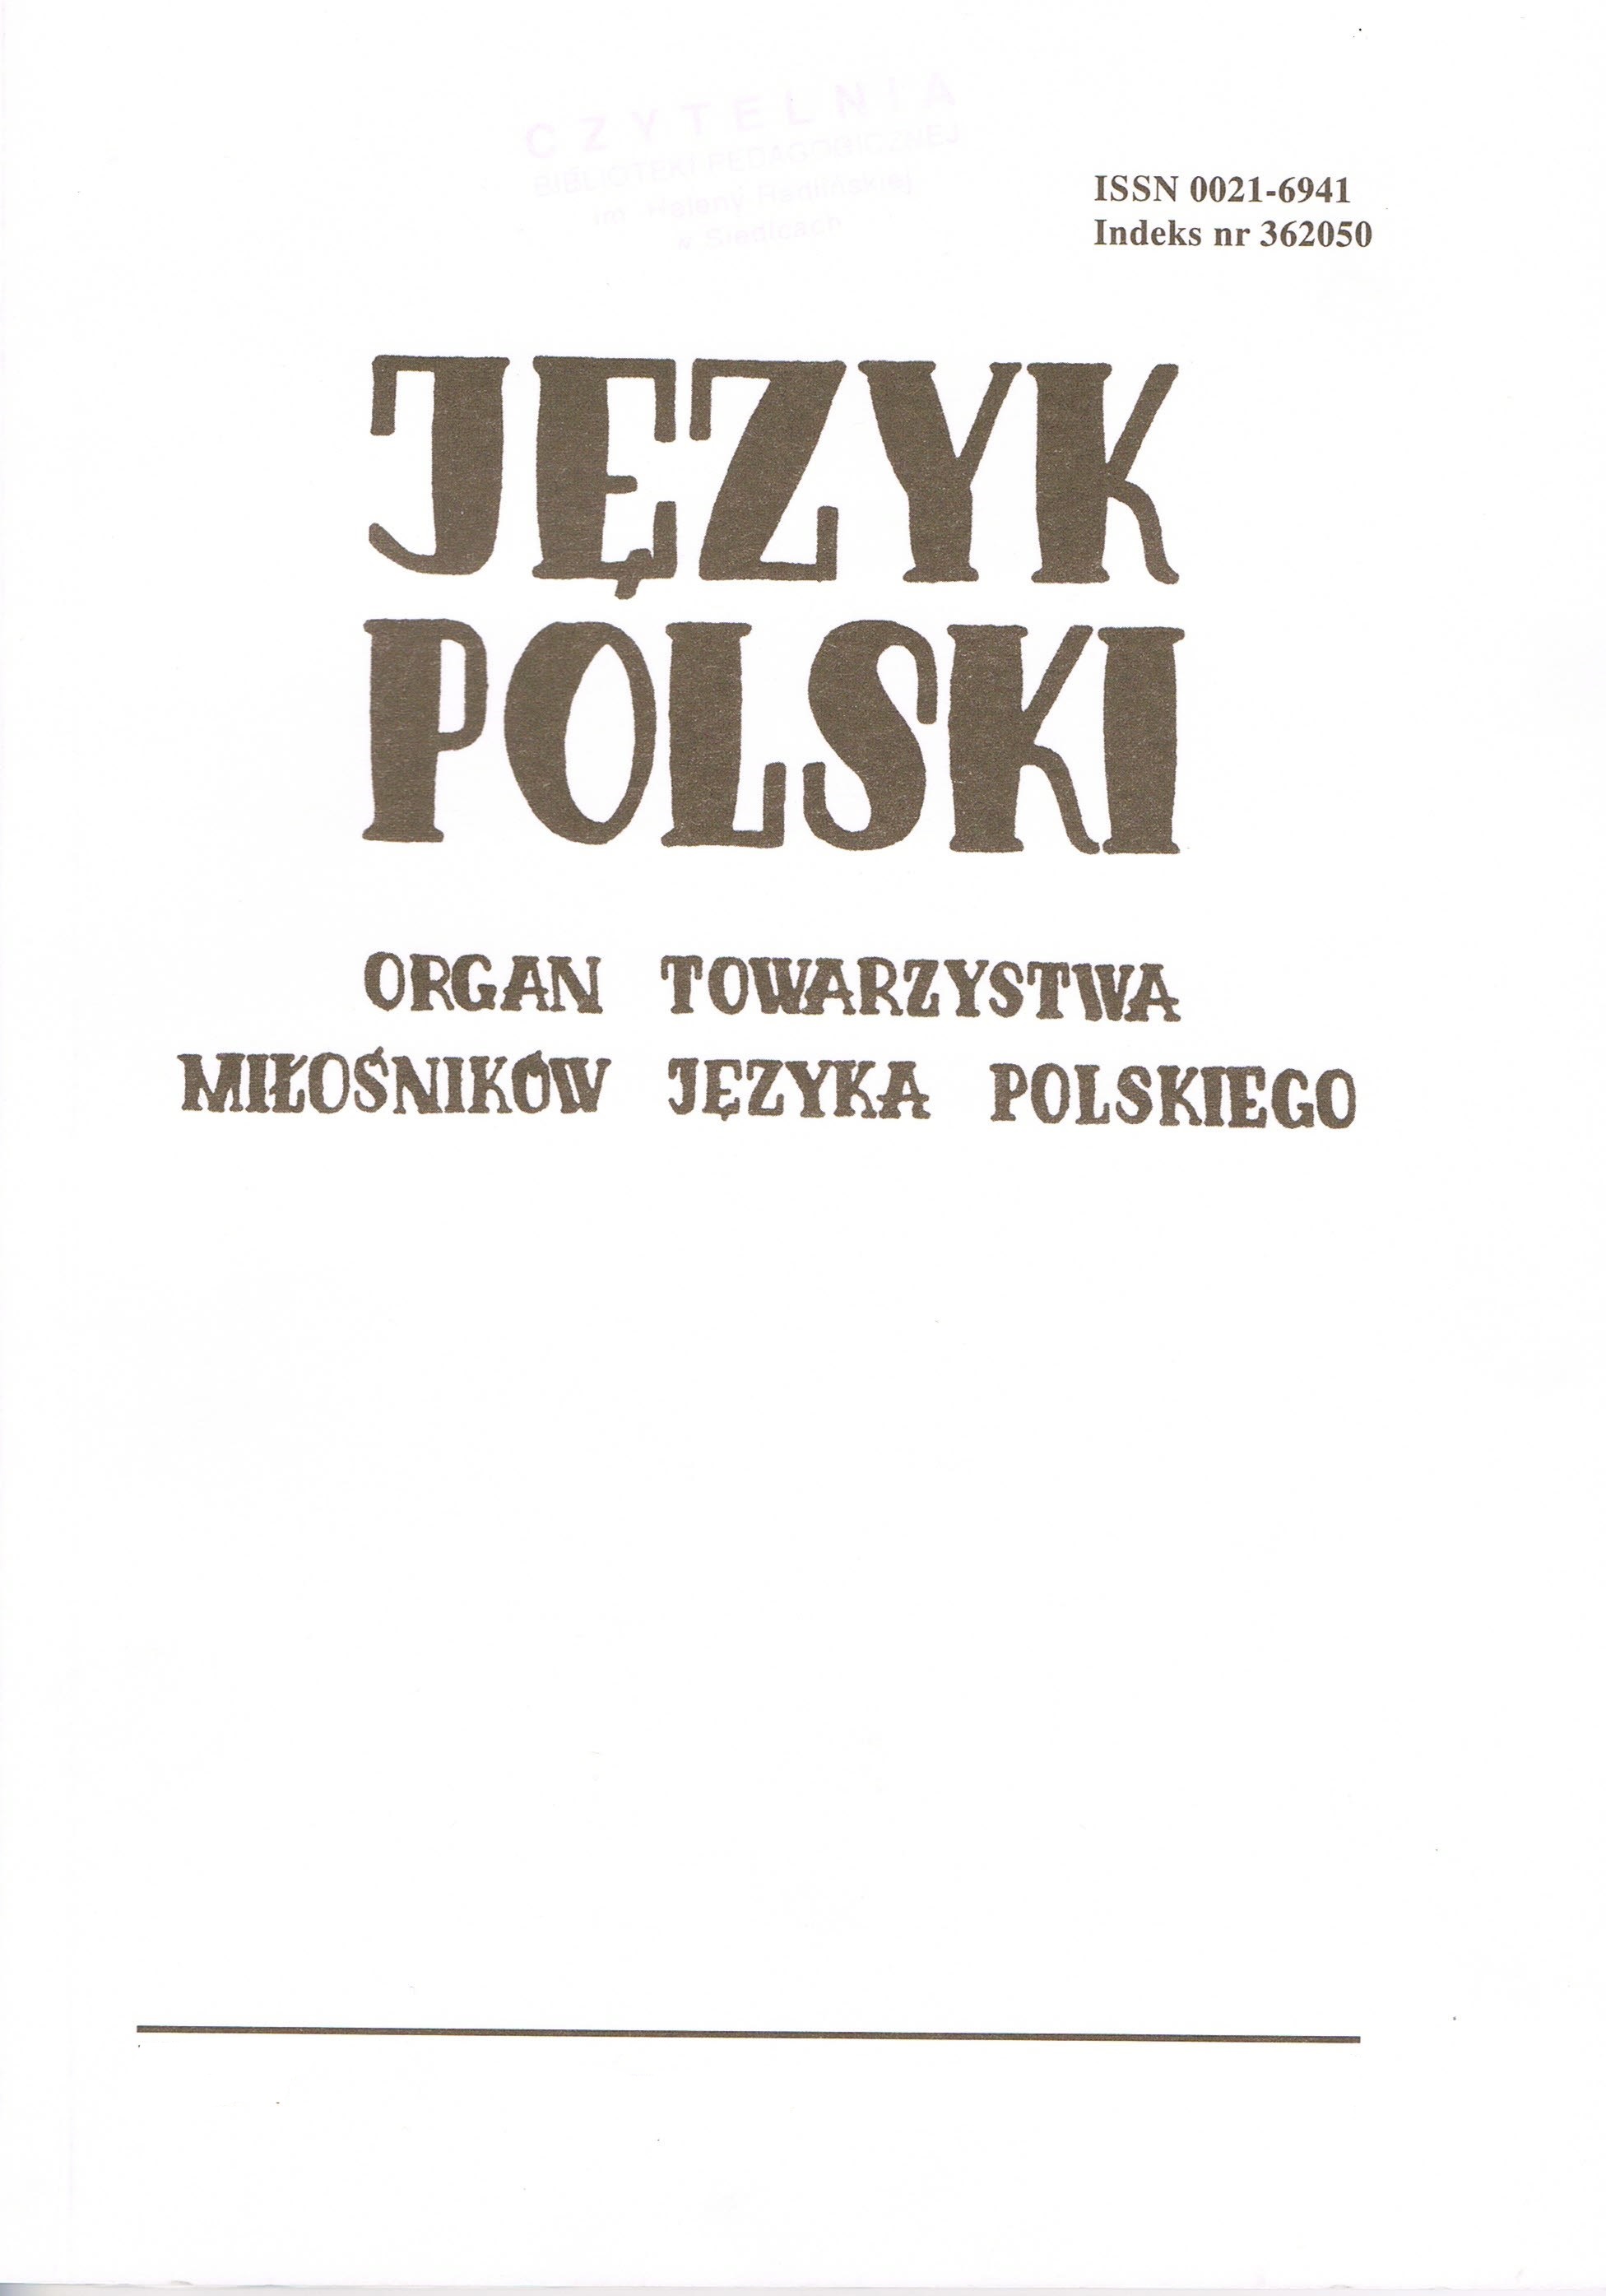 The Dictionary of Jan Kochanowski’s Polish has been finished Cover Image